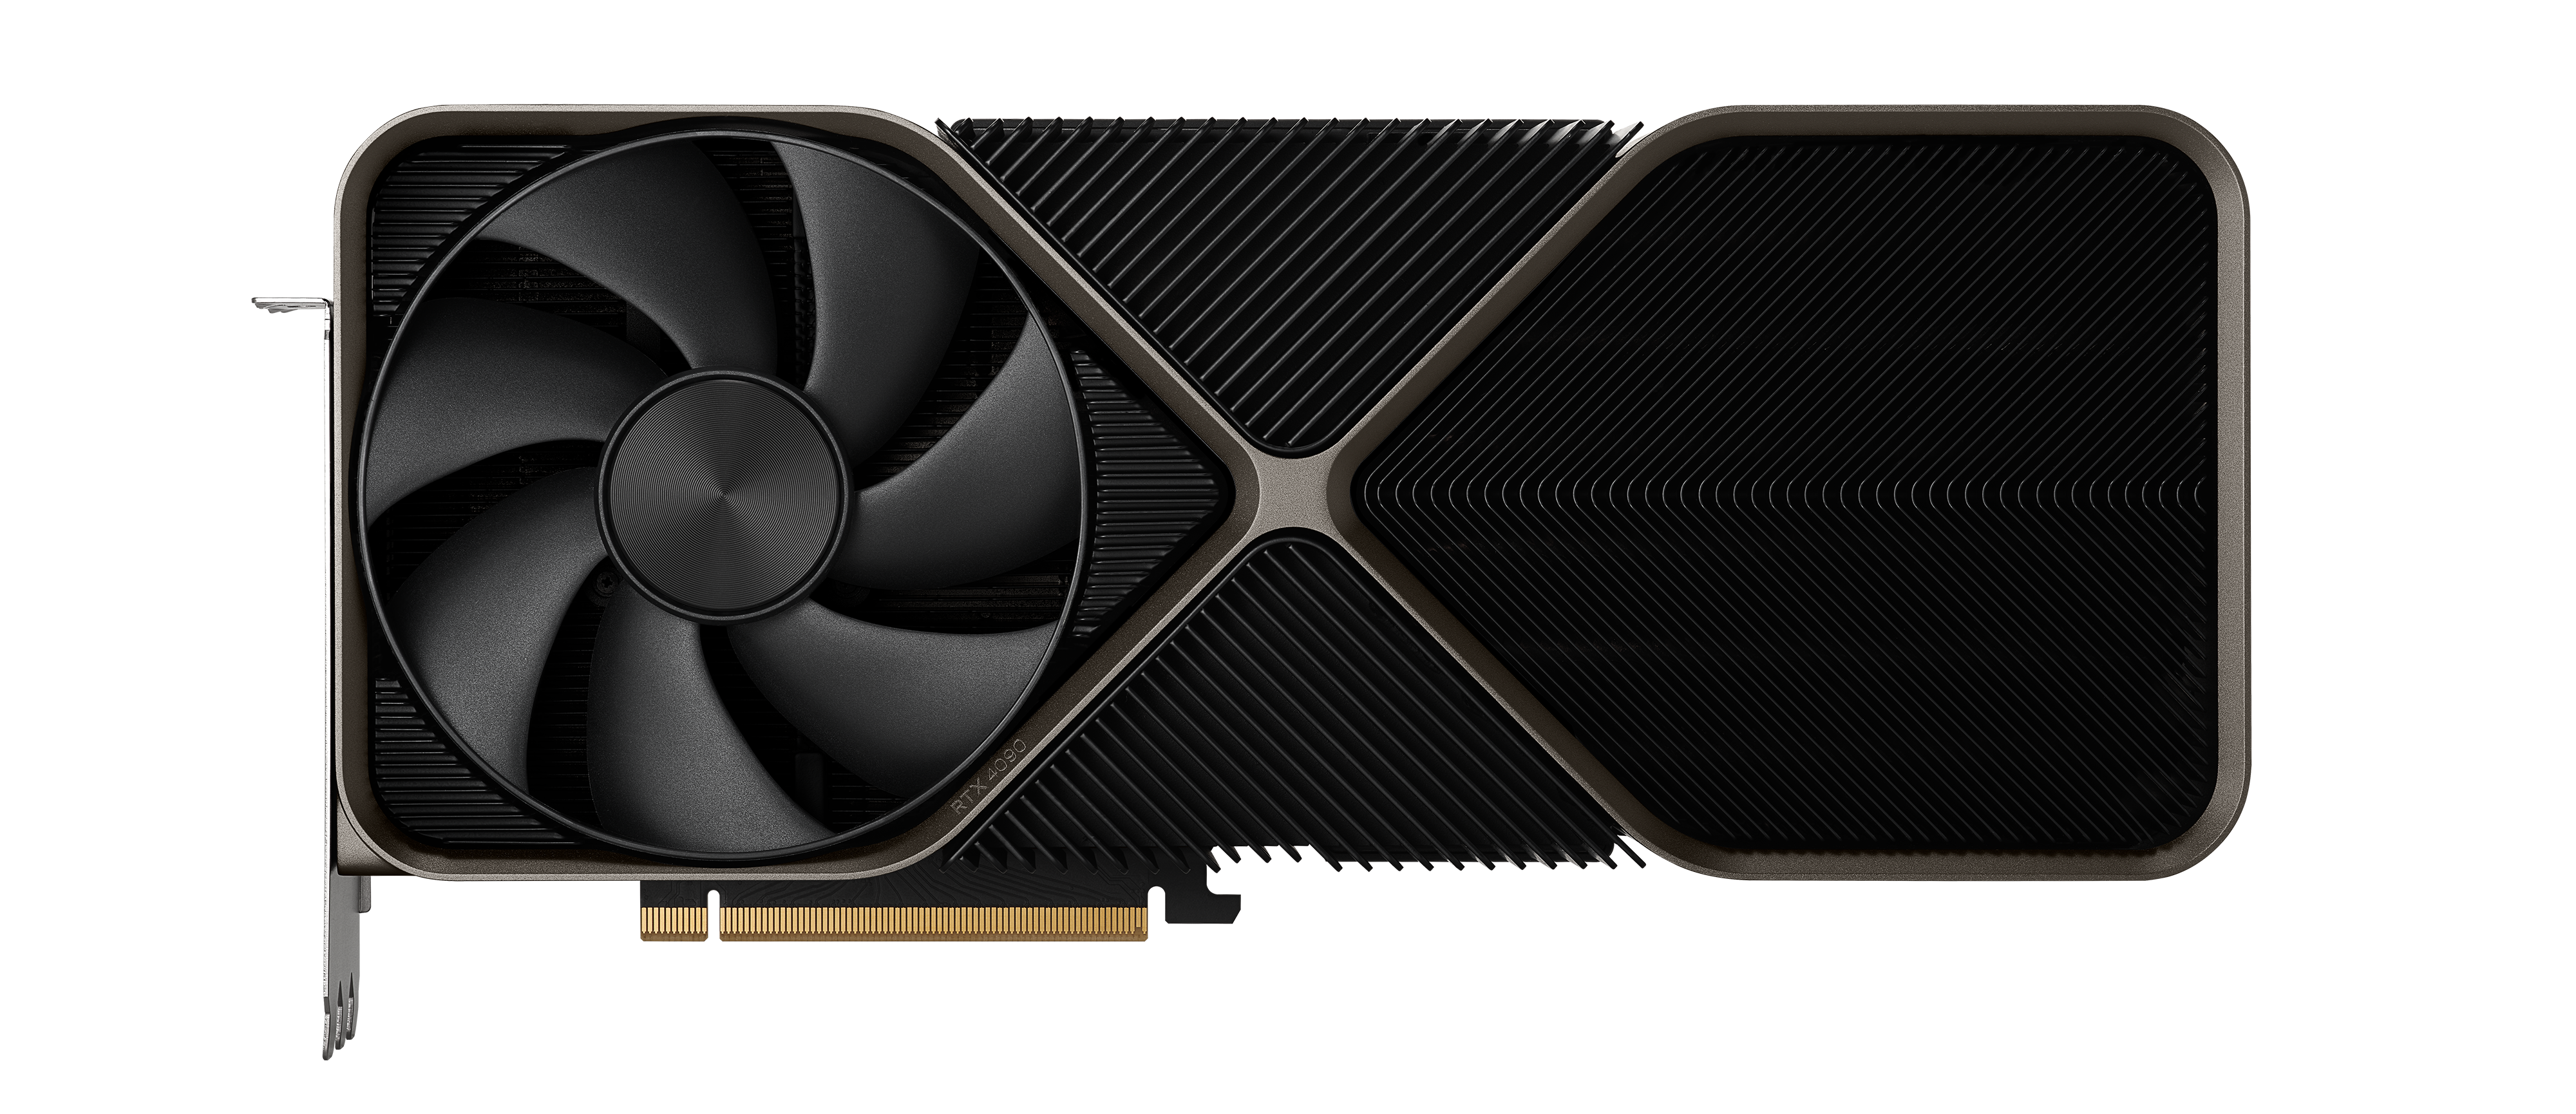 Gigabyte NVIDIA GeForce RTX 4080 Gaming Overclocked Triple Fan 16GB GDDR6X  PCIe 4.0 Graphics Card - Micro Center